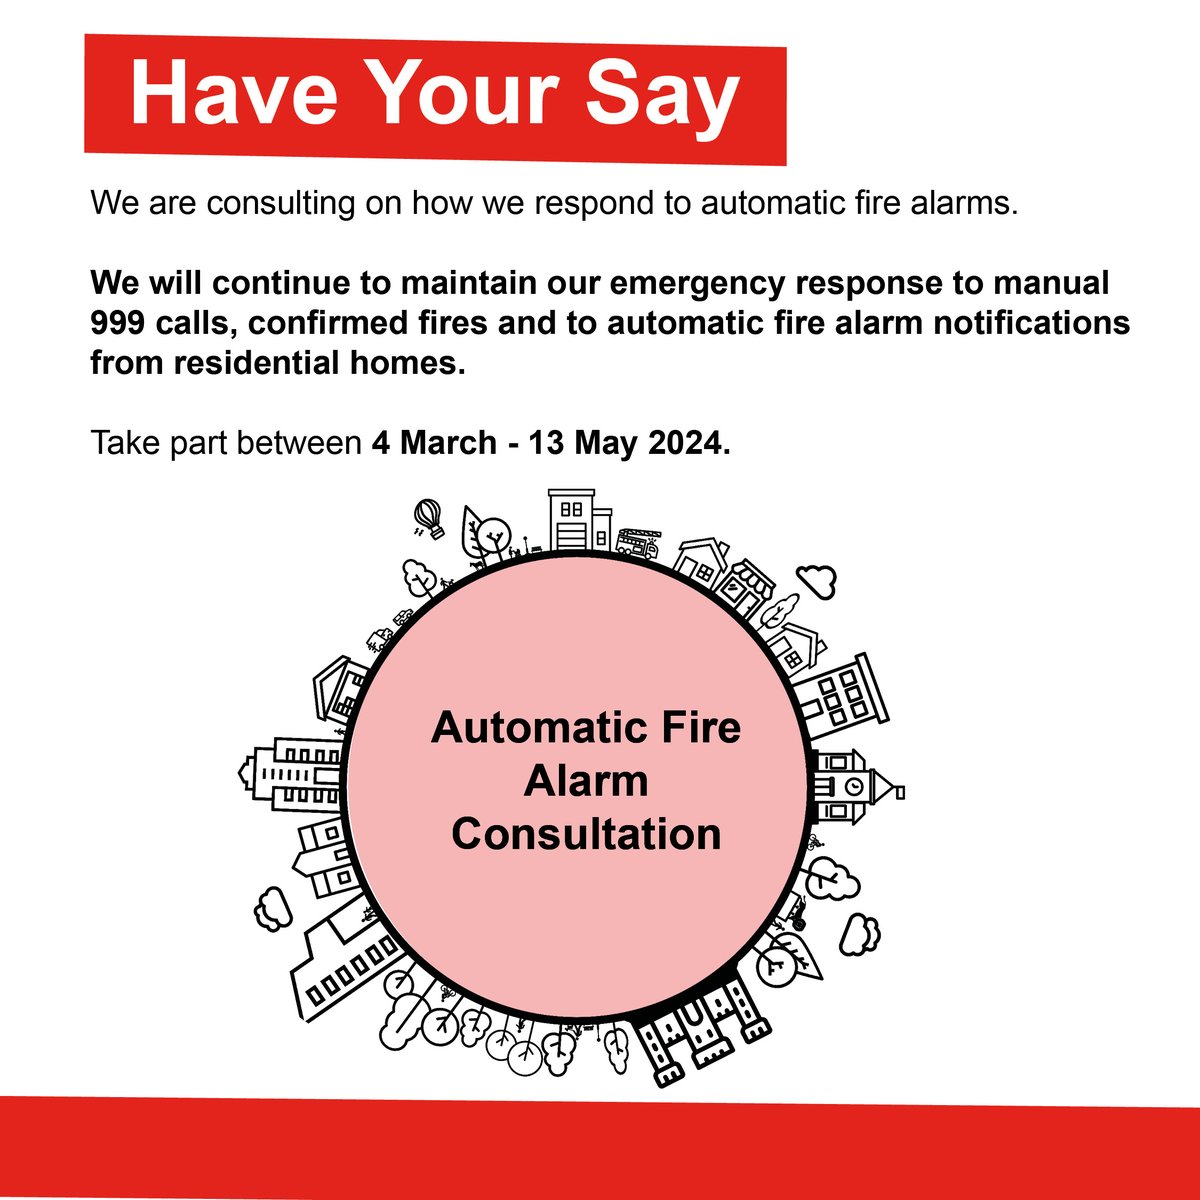 🚨 We are now at the halfway point of our consultation on how we respond to automatic fire alarms 🚨 Thank you to everyone who has submitted feedback. If you haven’t yet, please take time to have your say on our proposals: ow.ly/Fxml50QKJUe